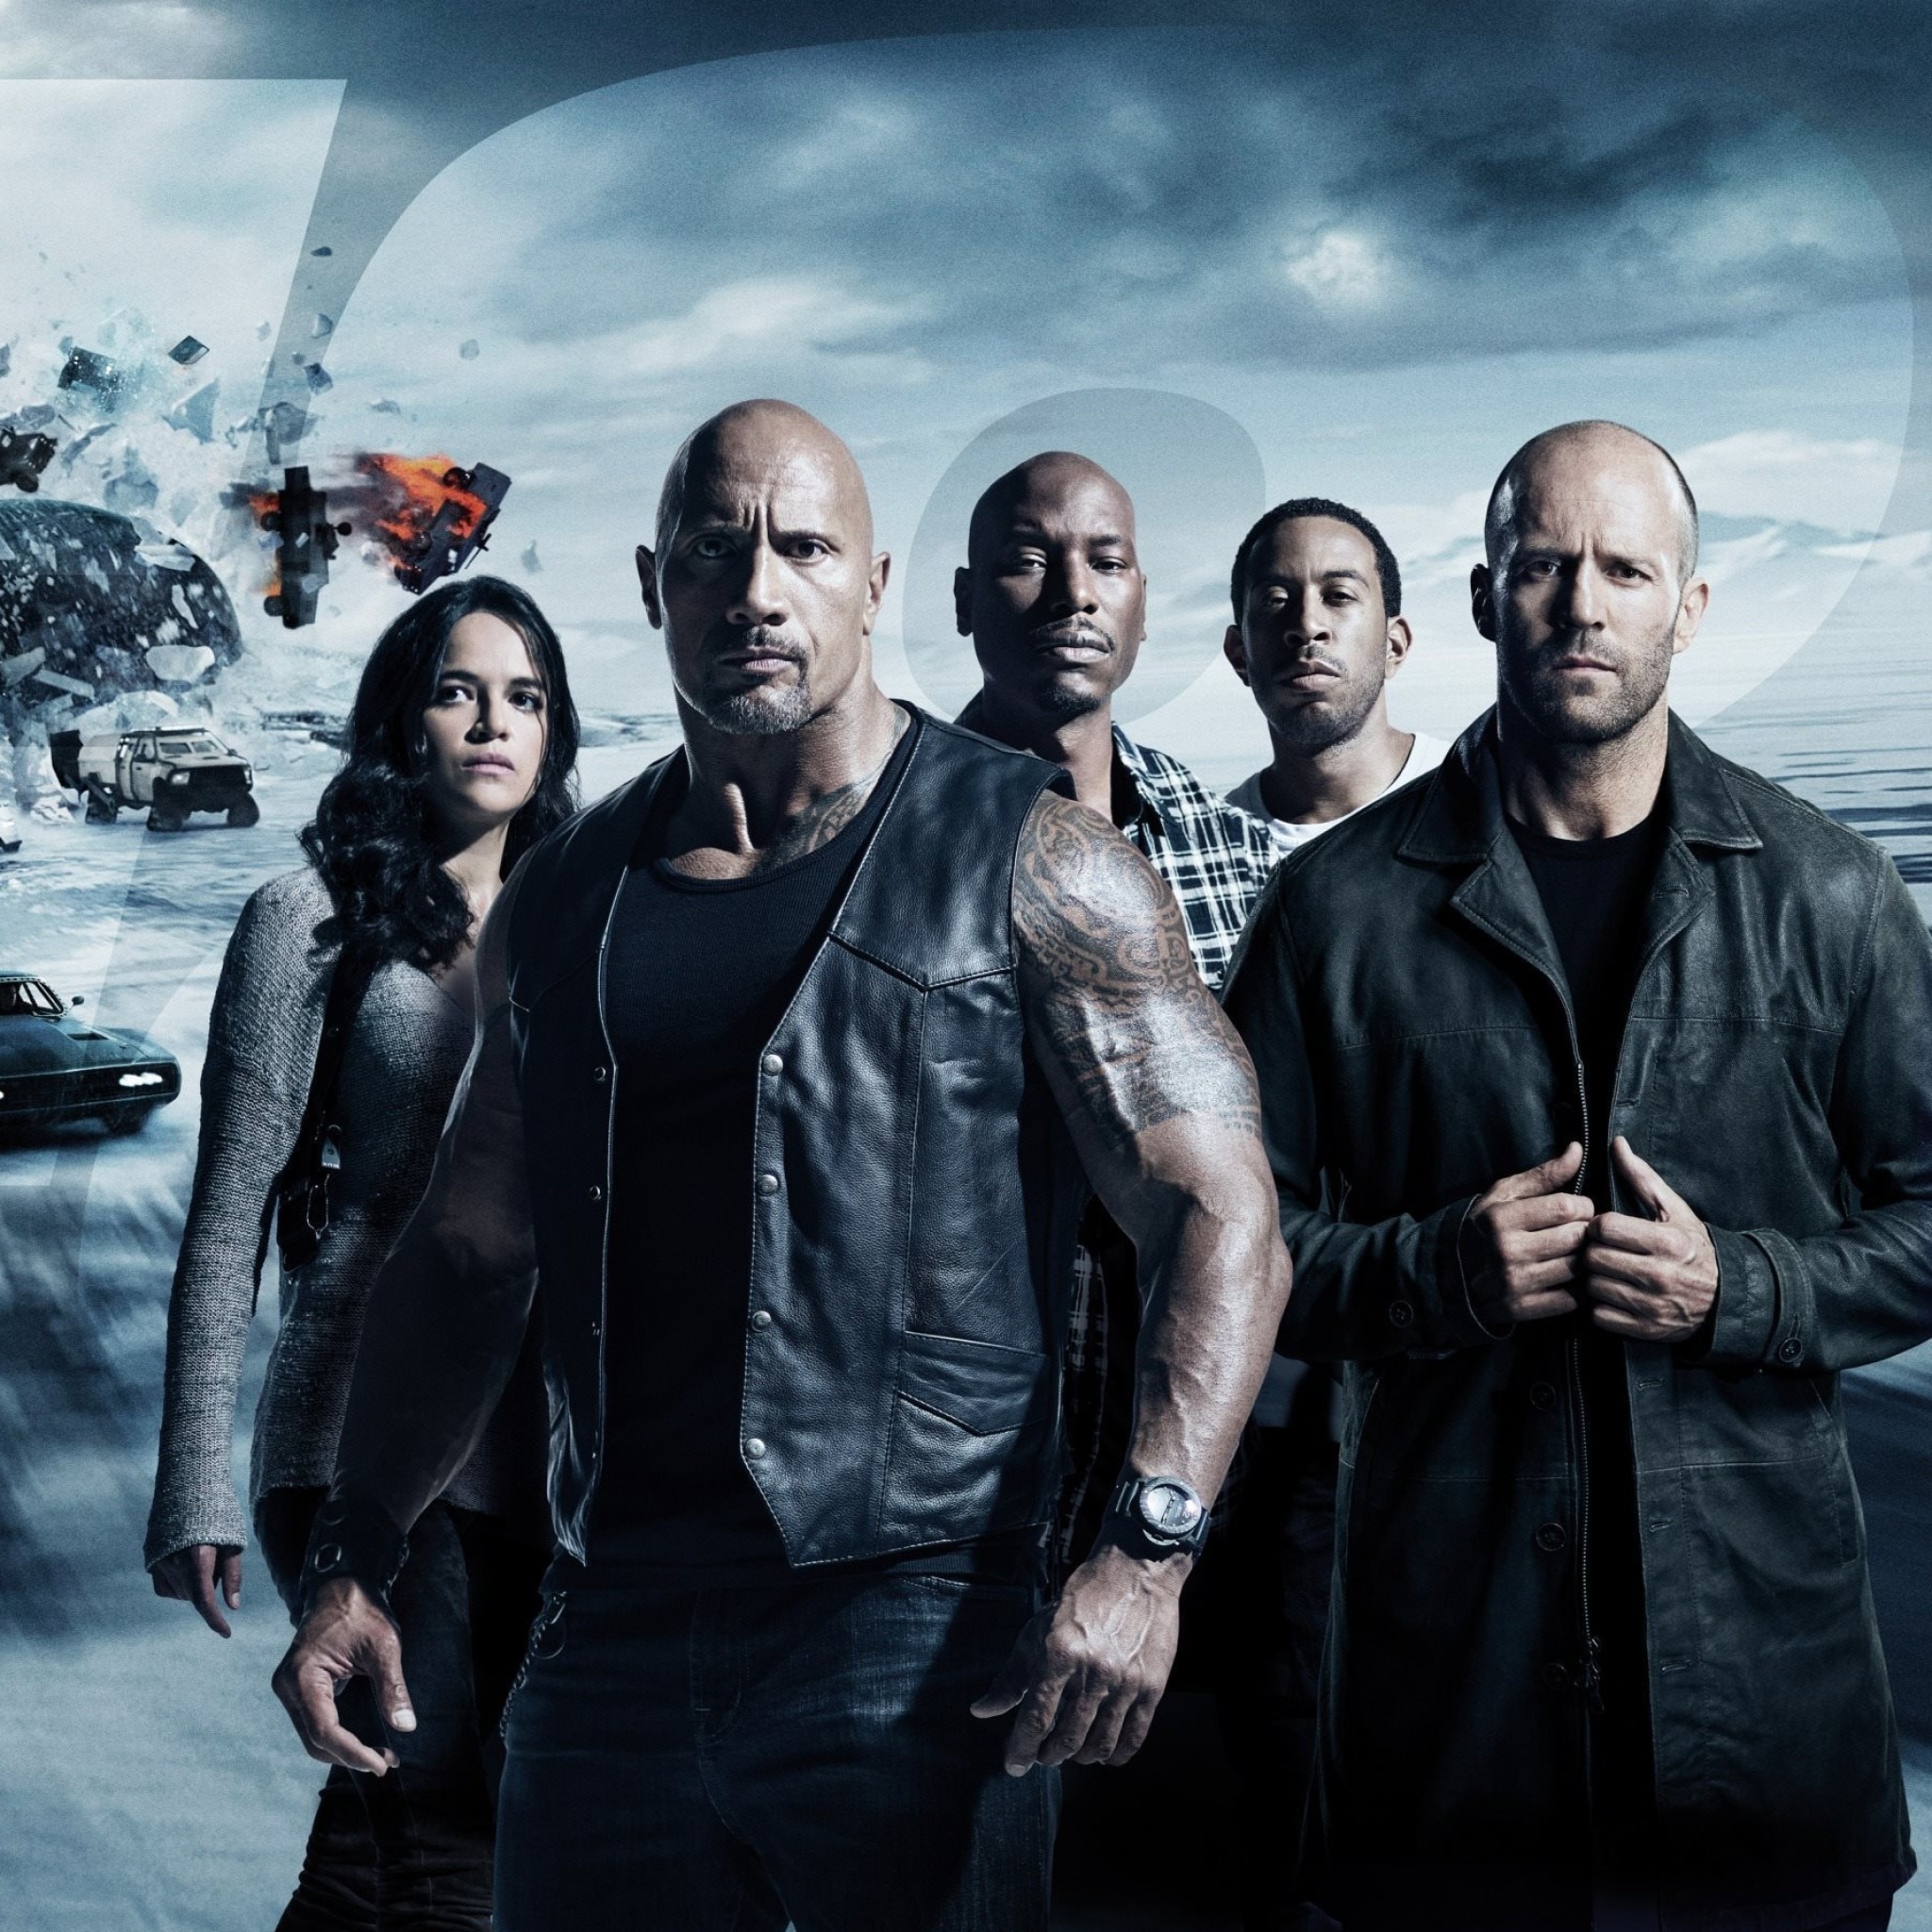 Обои The Fate of the Furious with Vin Diesel, Dwayne Johnson, Charlize Theron 2048x2048